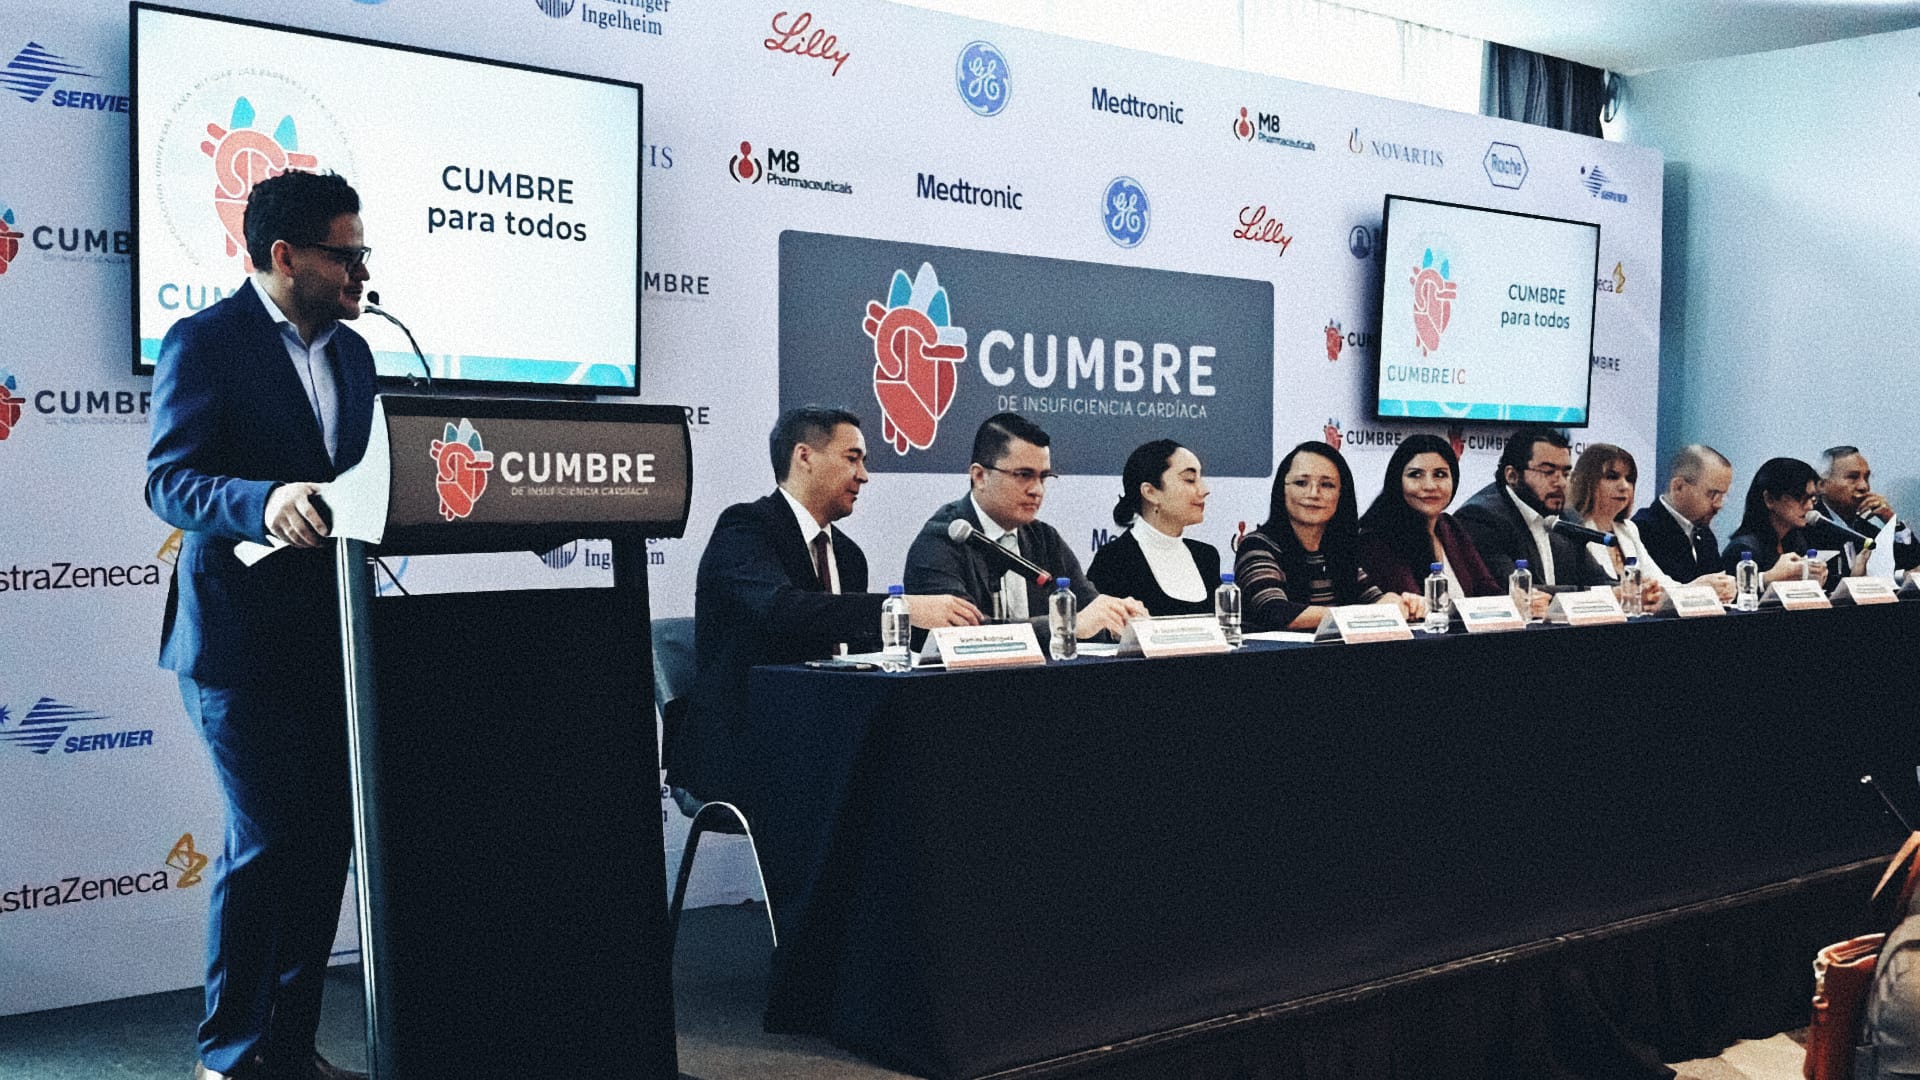 The CUMBRE Alliance seeks to improve heart disease care in Mexico